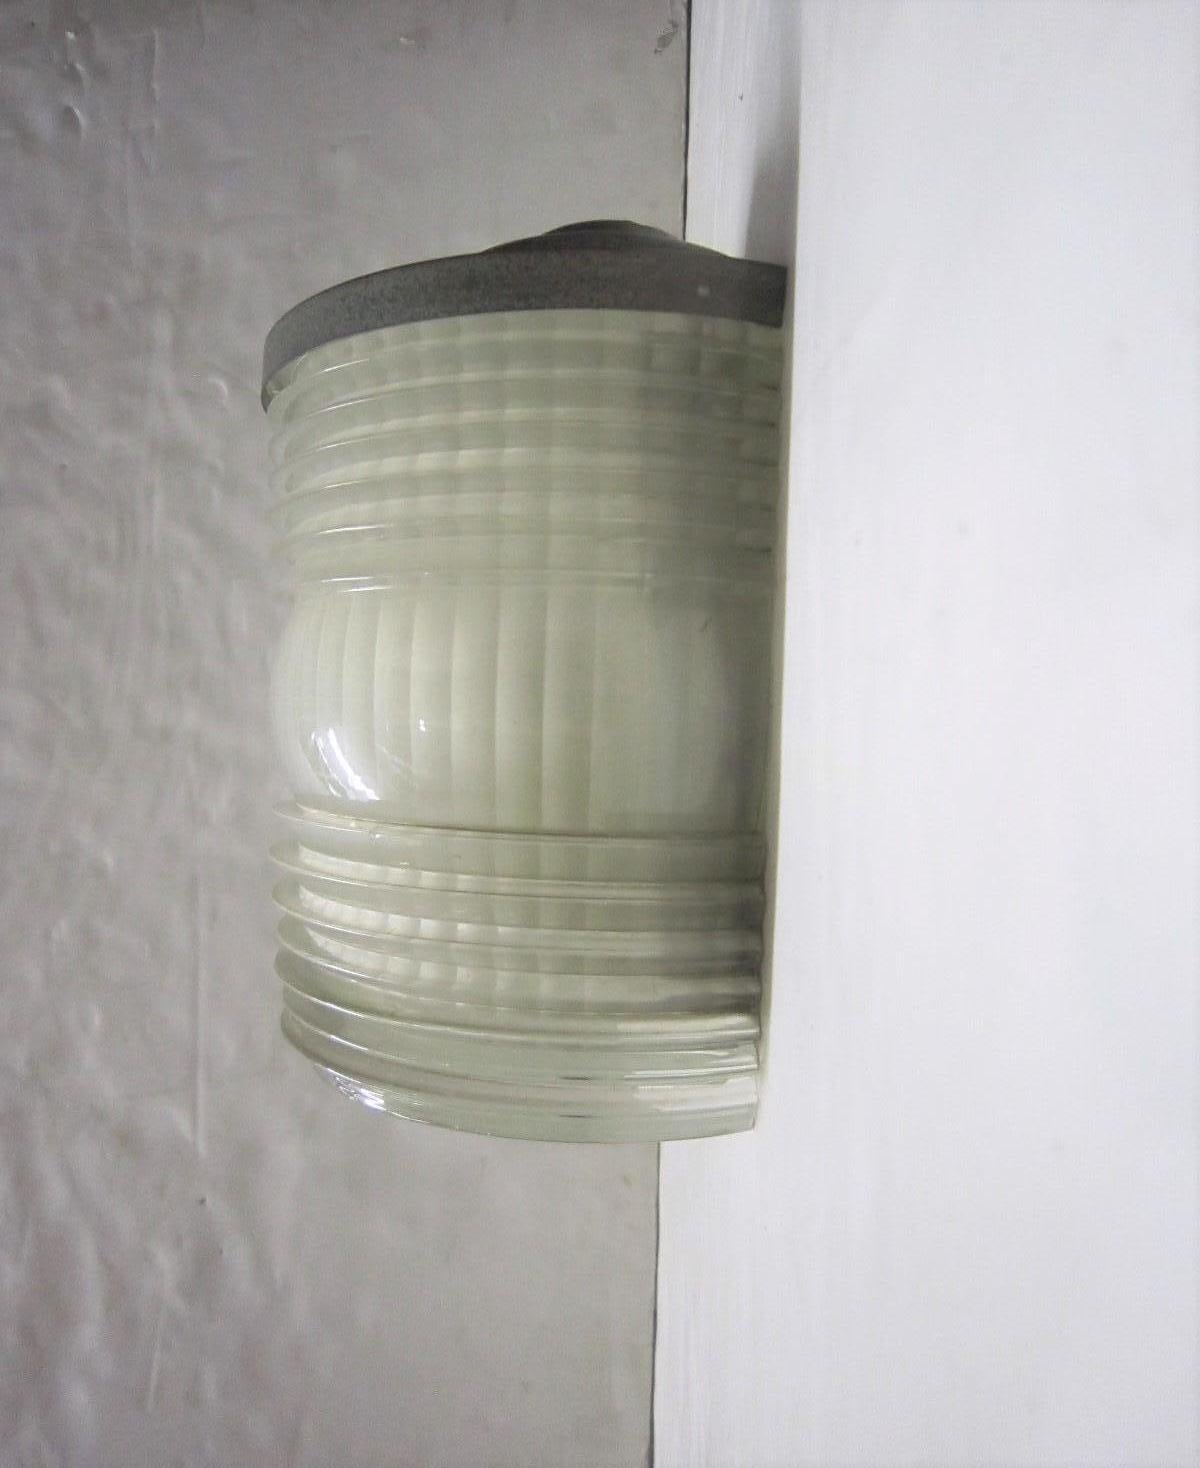 One Jean Perzel Original French Art Deco Period Glass and Metal Sconce, Signed In Good Condition For Sale In New York City, NY